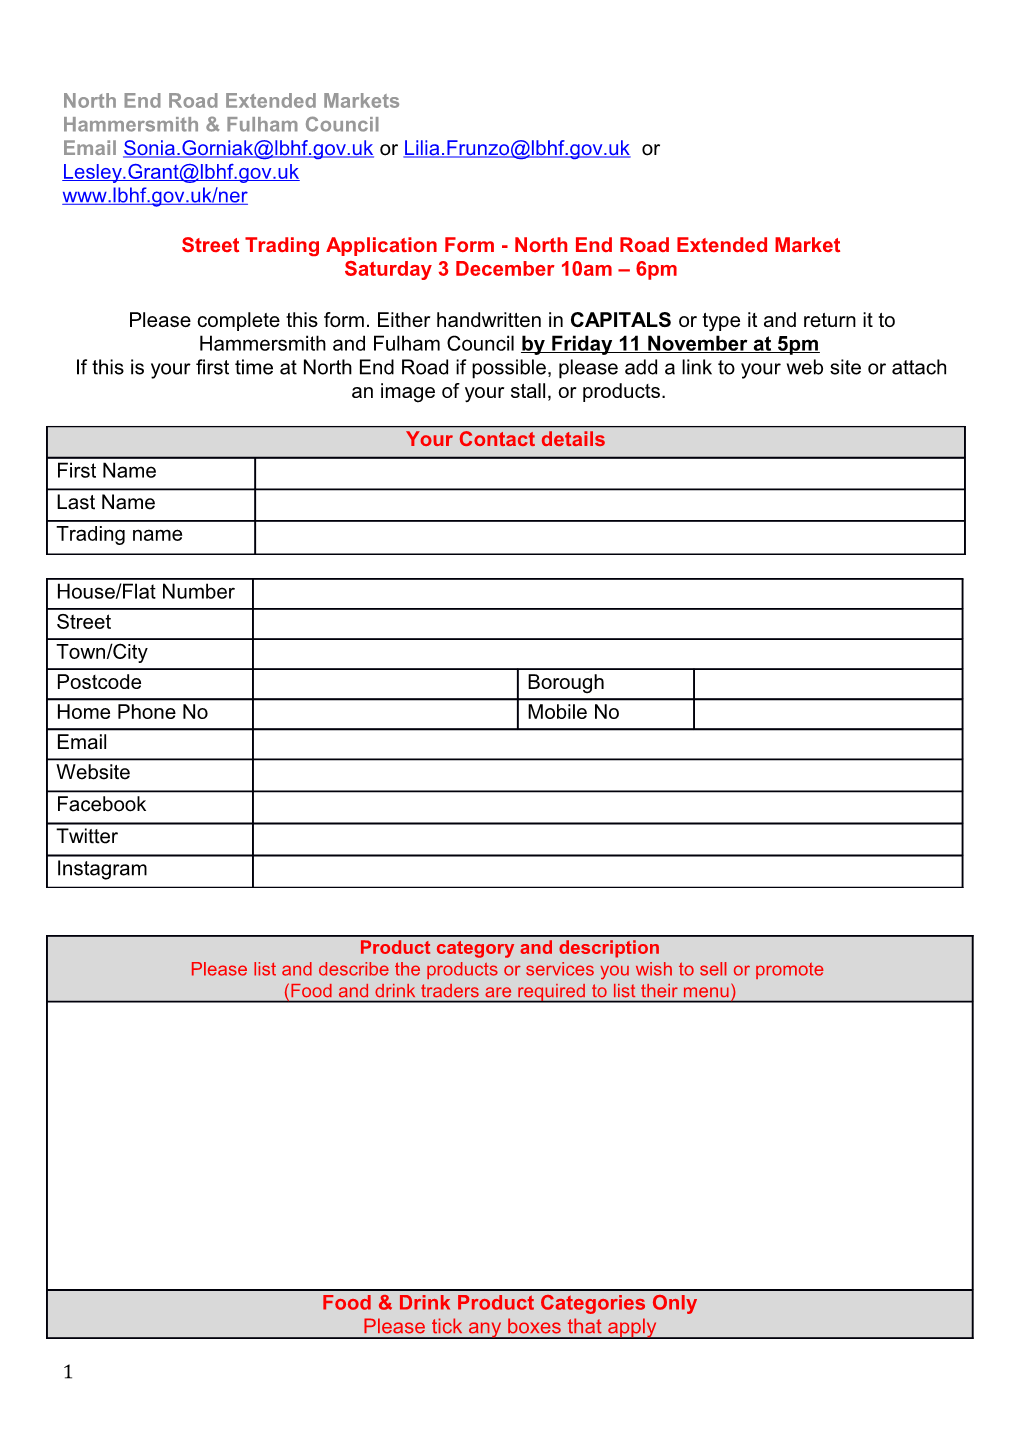 Street Trading Application Form - North End Road Extended Market